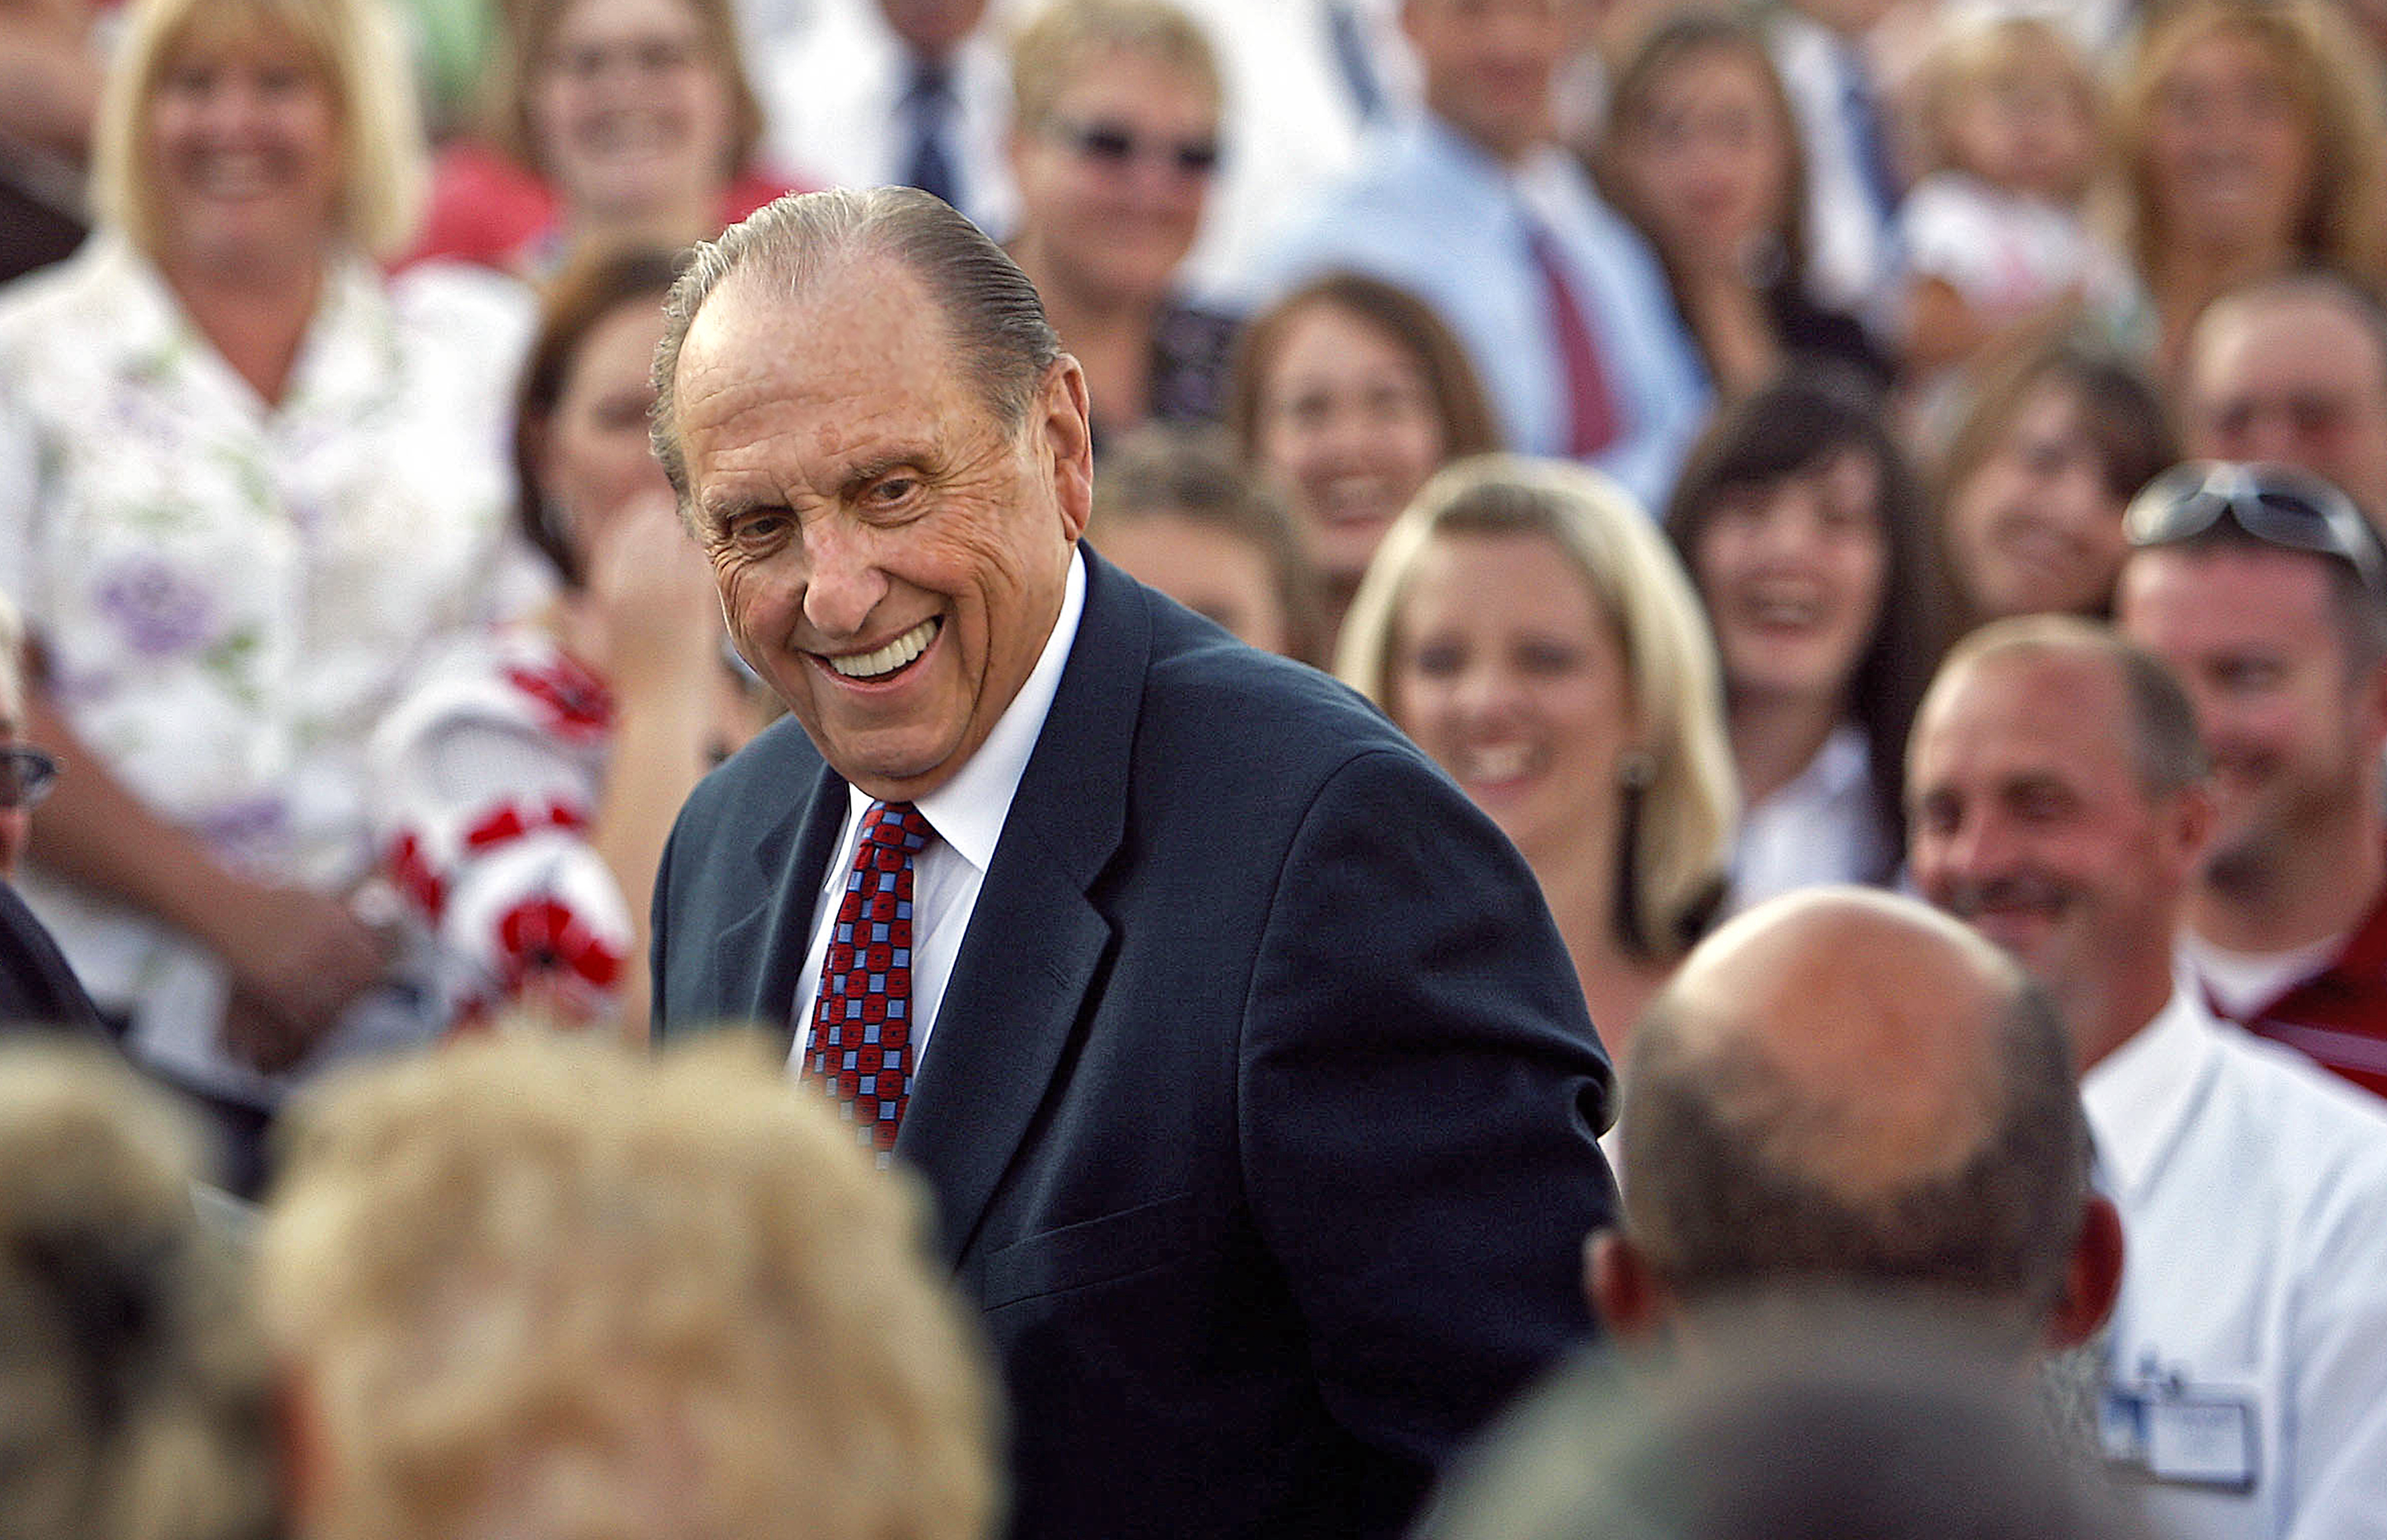 Thomas S. Monson enjoying time with members at the cultural celebration prior to the Twin Falls Idaho Temple dedication, August 23, 2008.